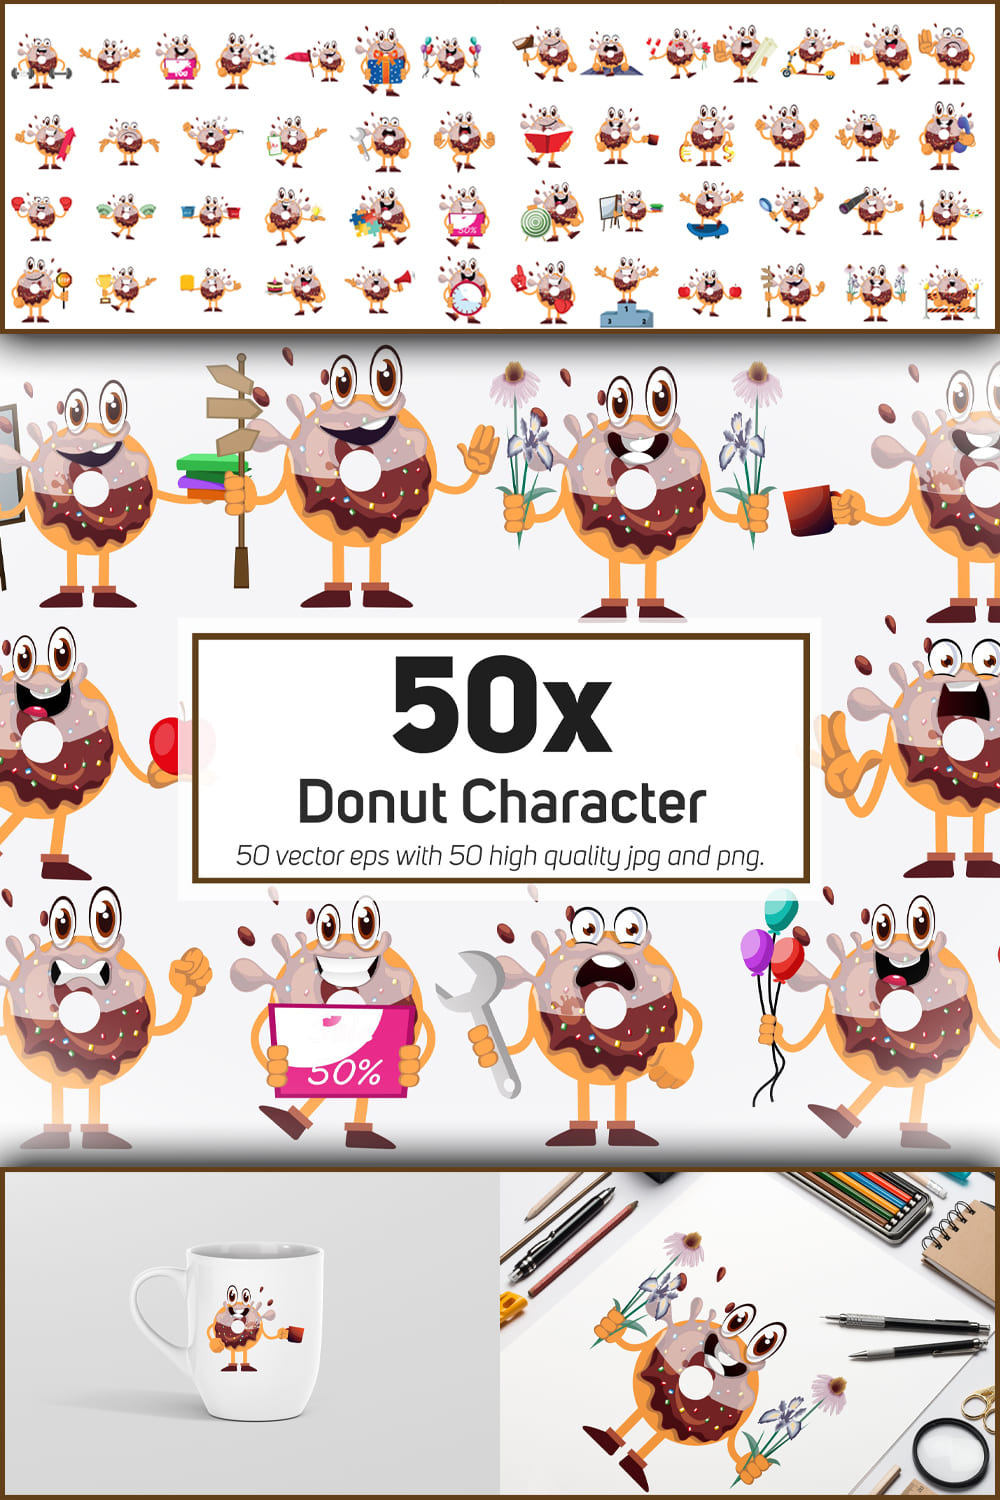 543831 50x donut character and mascot collection illustra pinterest 1000 1500 927